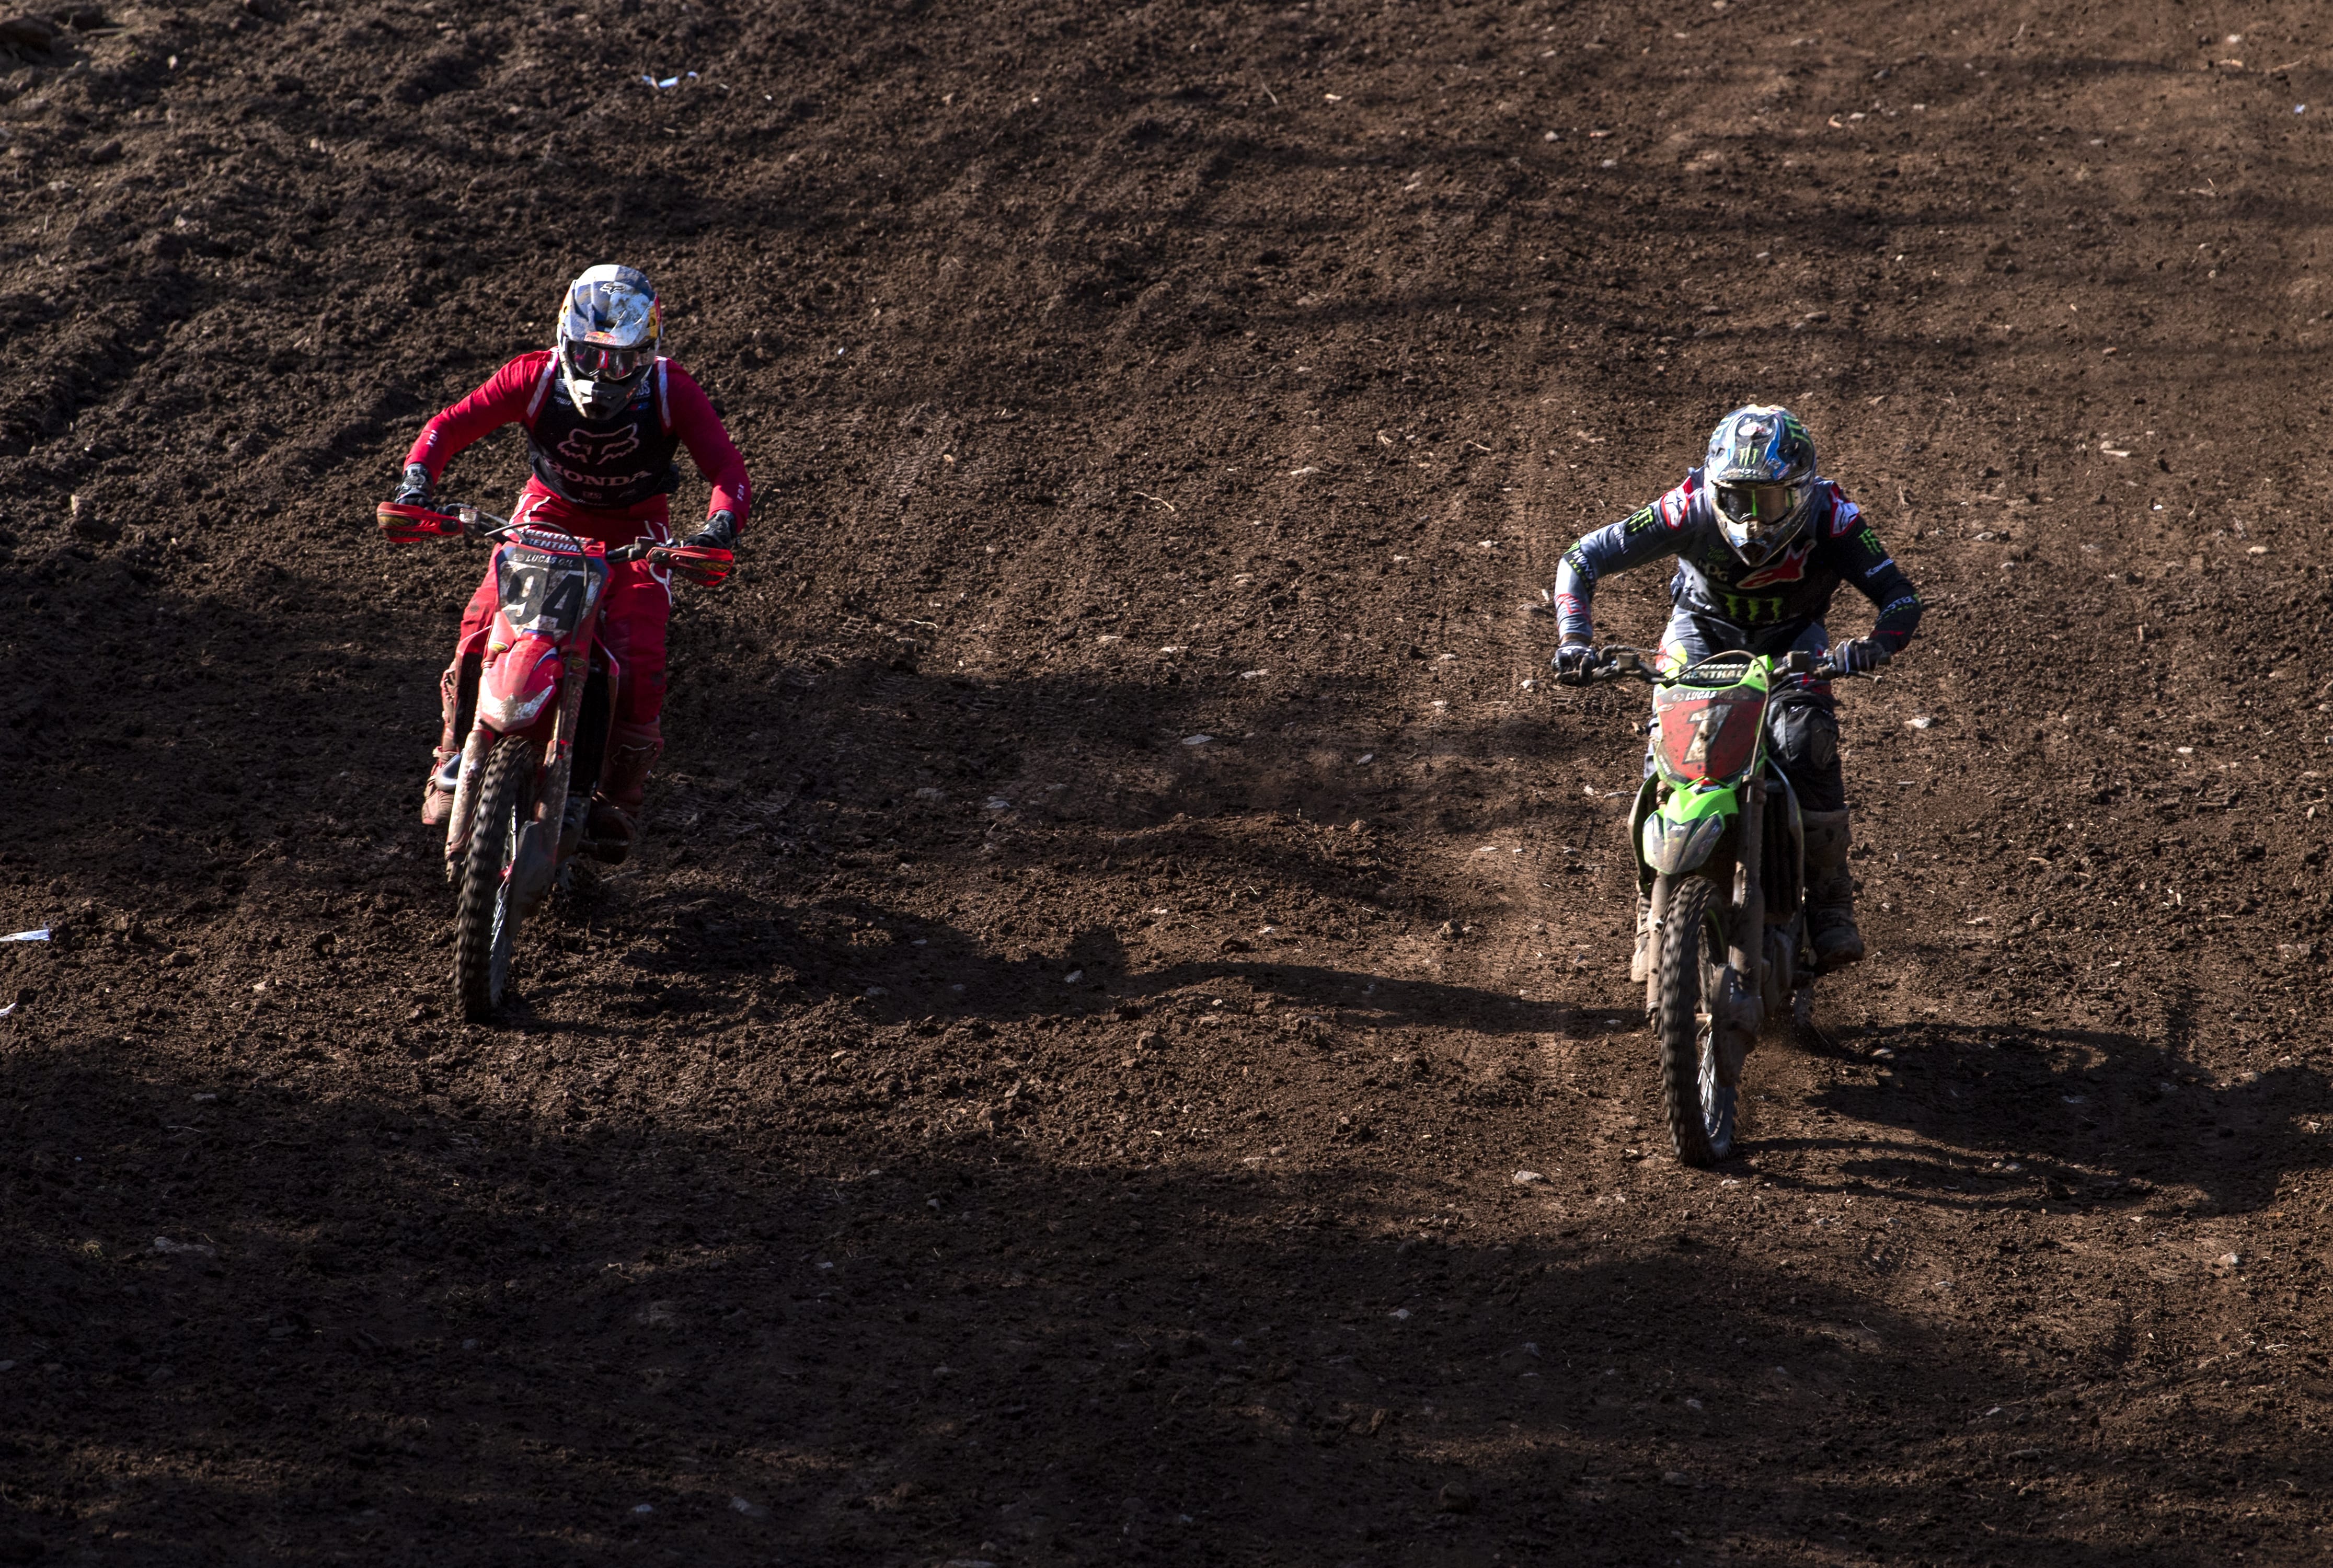 Ken Roczen of Germany, left, and Eli Tomac of Cortez, Colorado, right, race down a hill during the final laps of the 450 Class Moto #2 at the Washougal National Lucas Oil Pro Motocross at the Washougal MX Park on Saturday afternoon, July 27, 2019. Roczen placed second and Tomac placed first in the 450MX race.